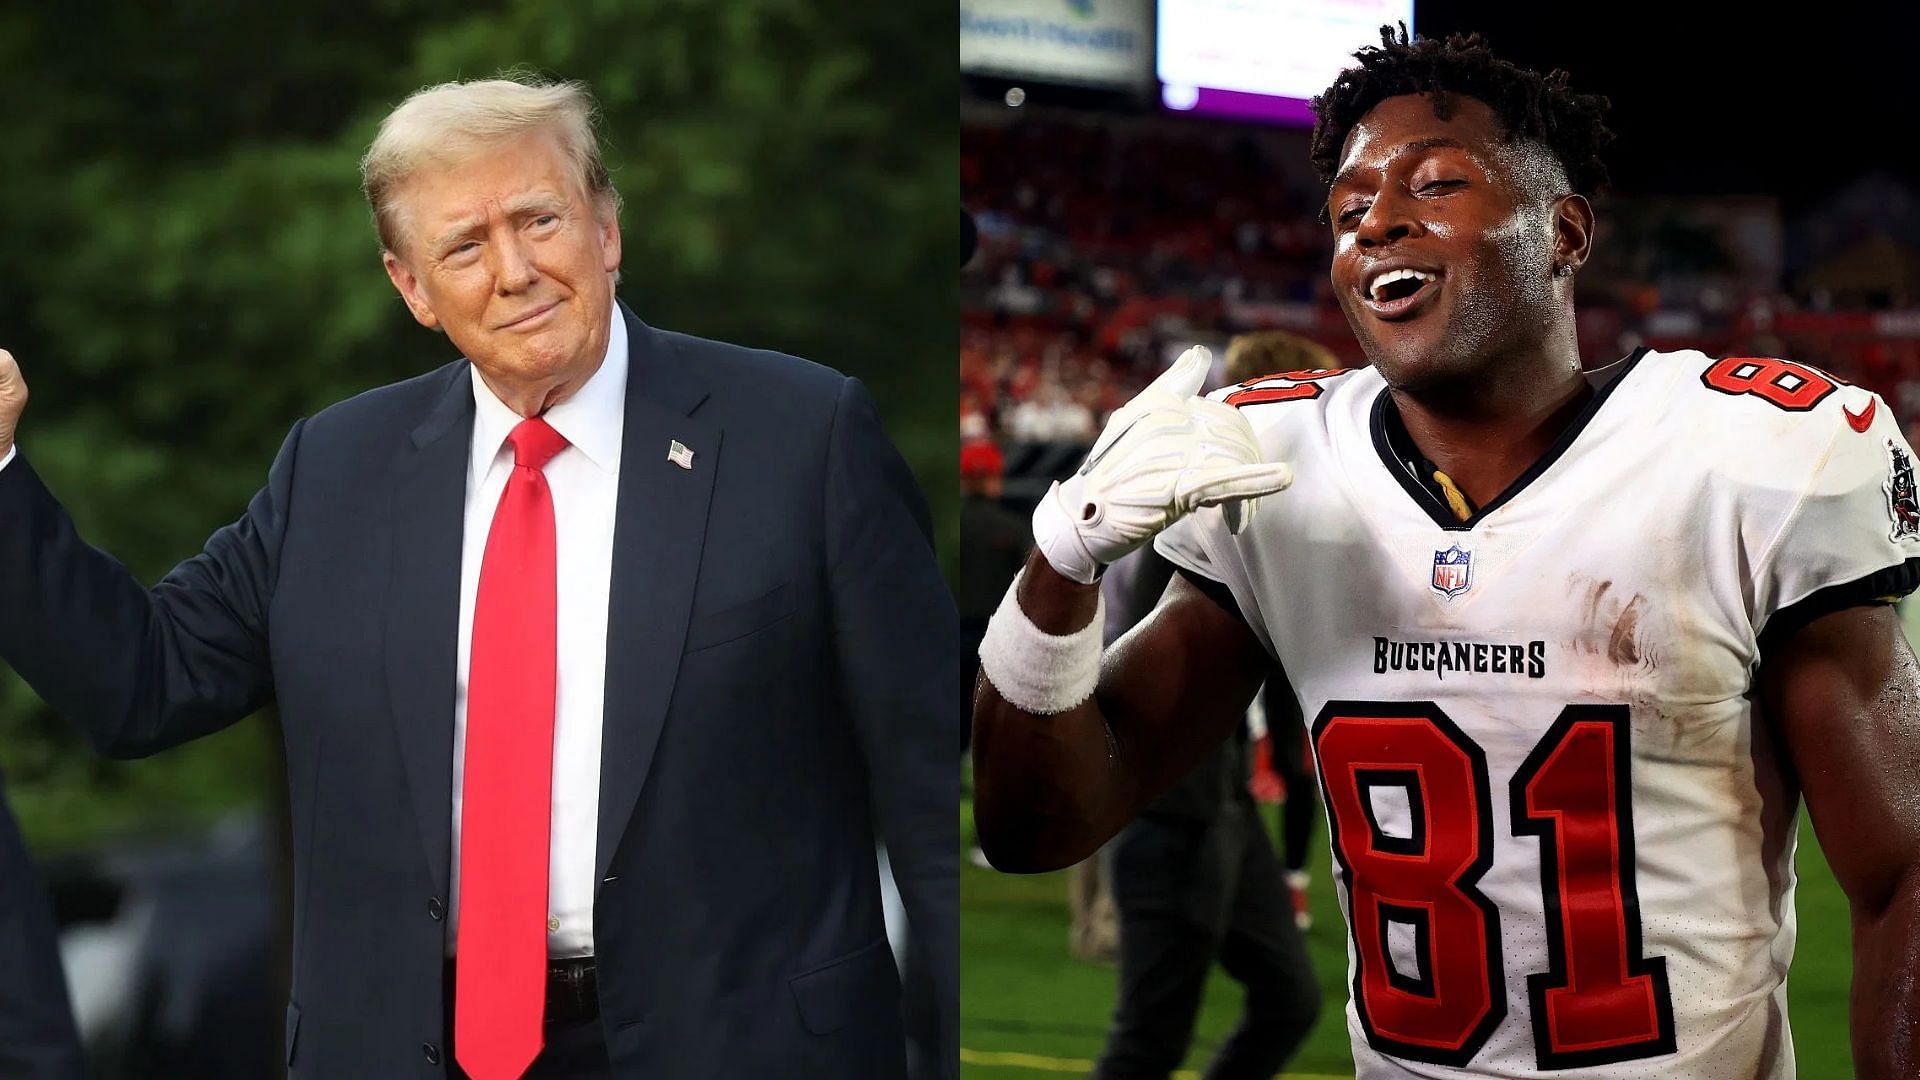 Antonio Brown is endorsing Donald Trump for the 2024 election